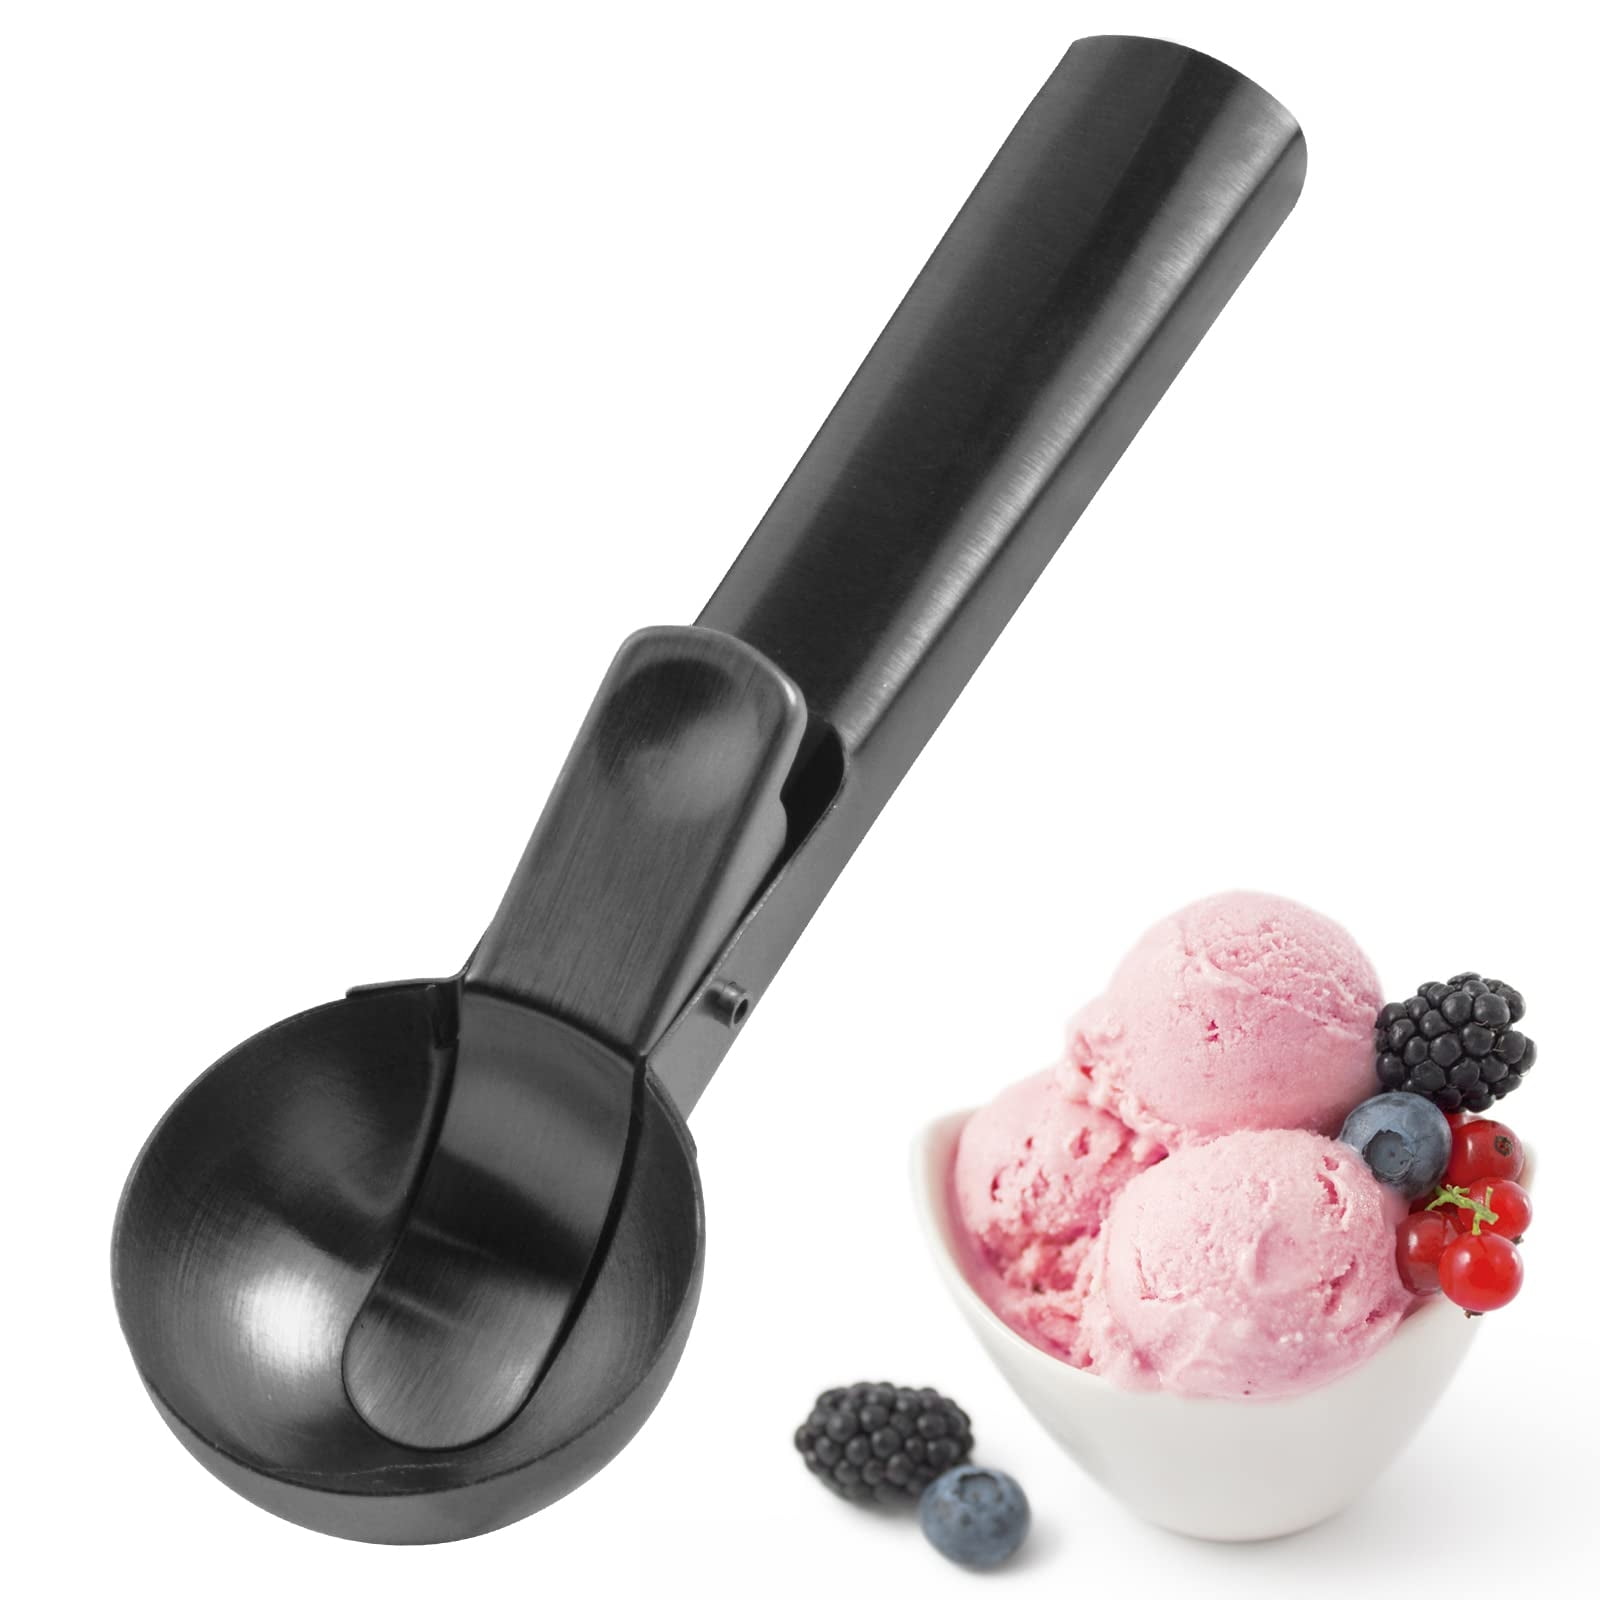 Ice Cream Scoop with Modern Heat-Conducting Aluminum Ergonomic Handleby Sw  Cookware: Scoops IceCream Easily, 2 Ounce Portion